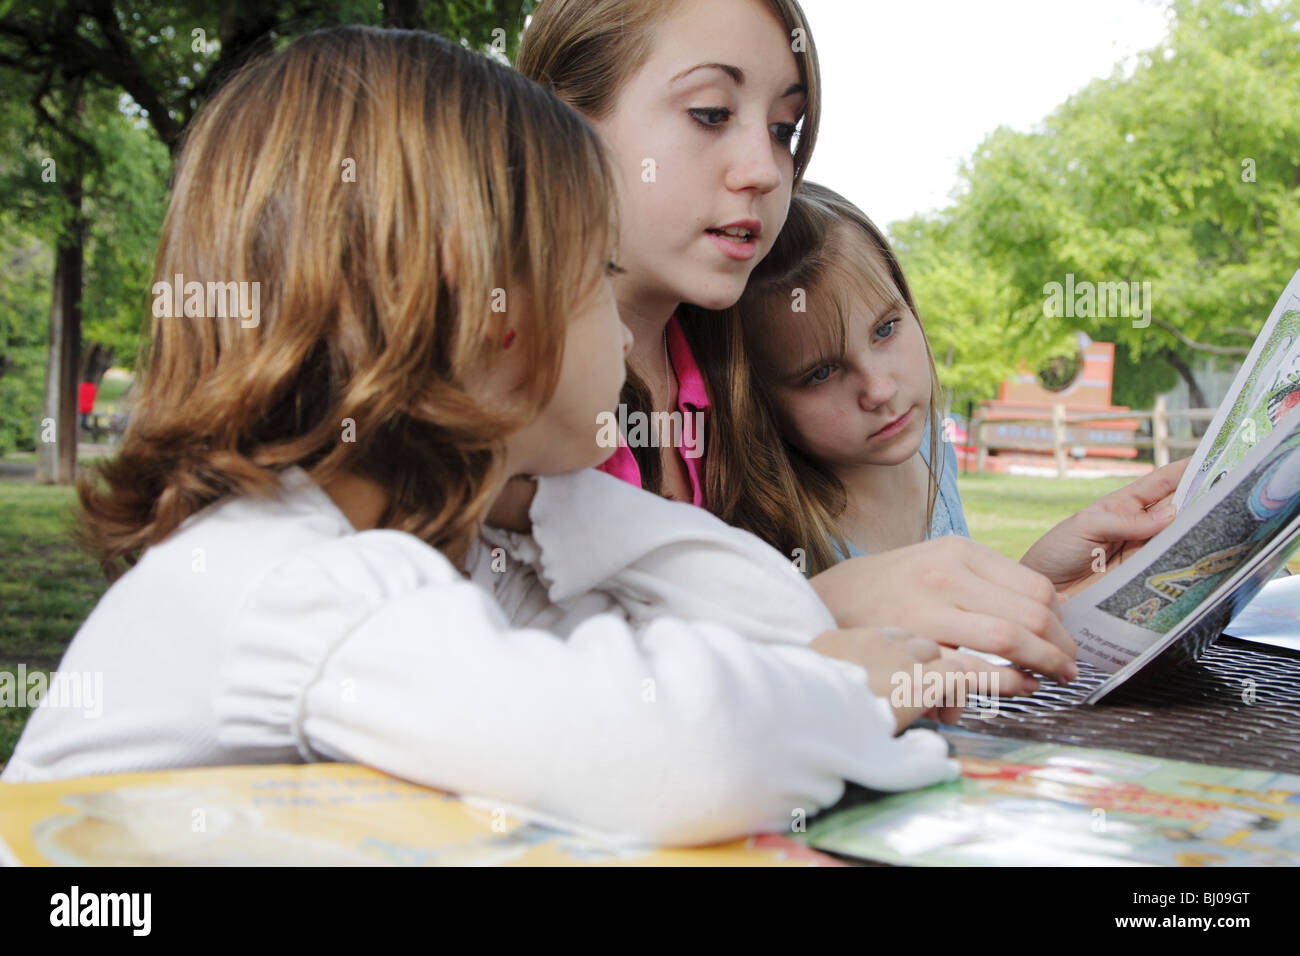 Teen girl reading to two younger girls in the park Stock Photo